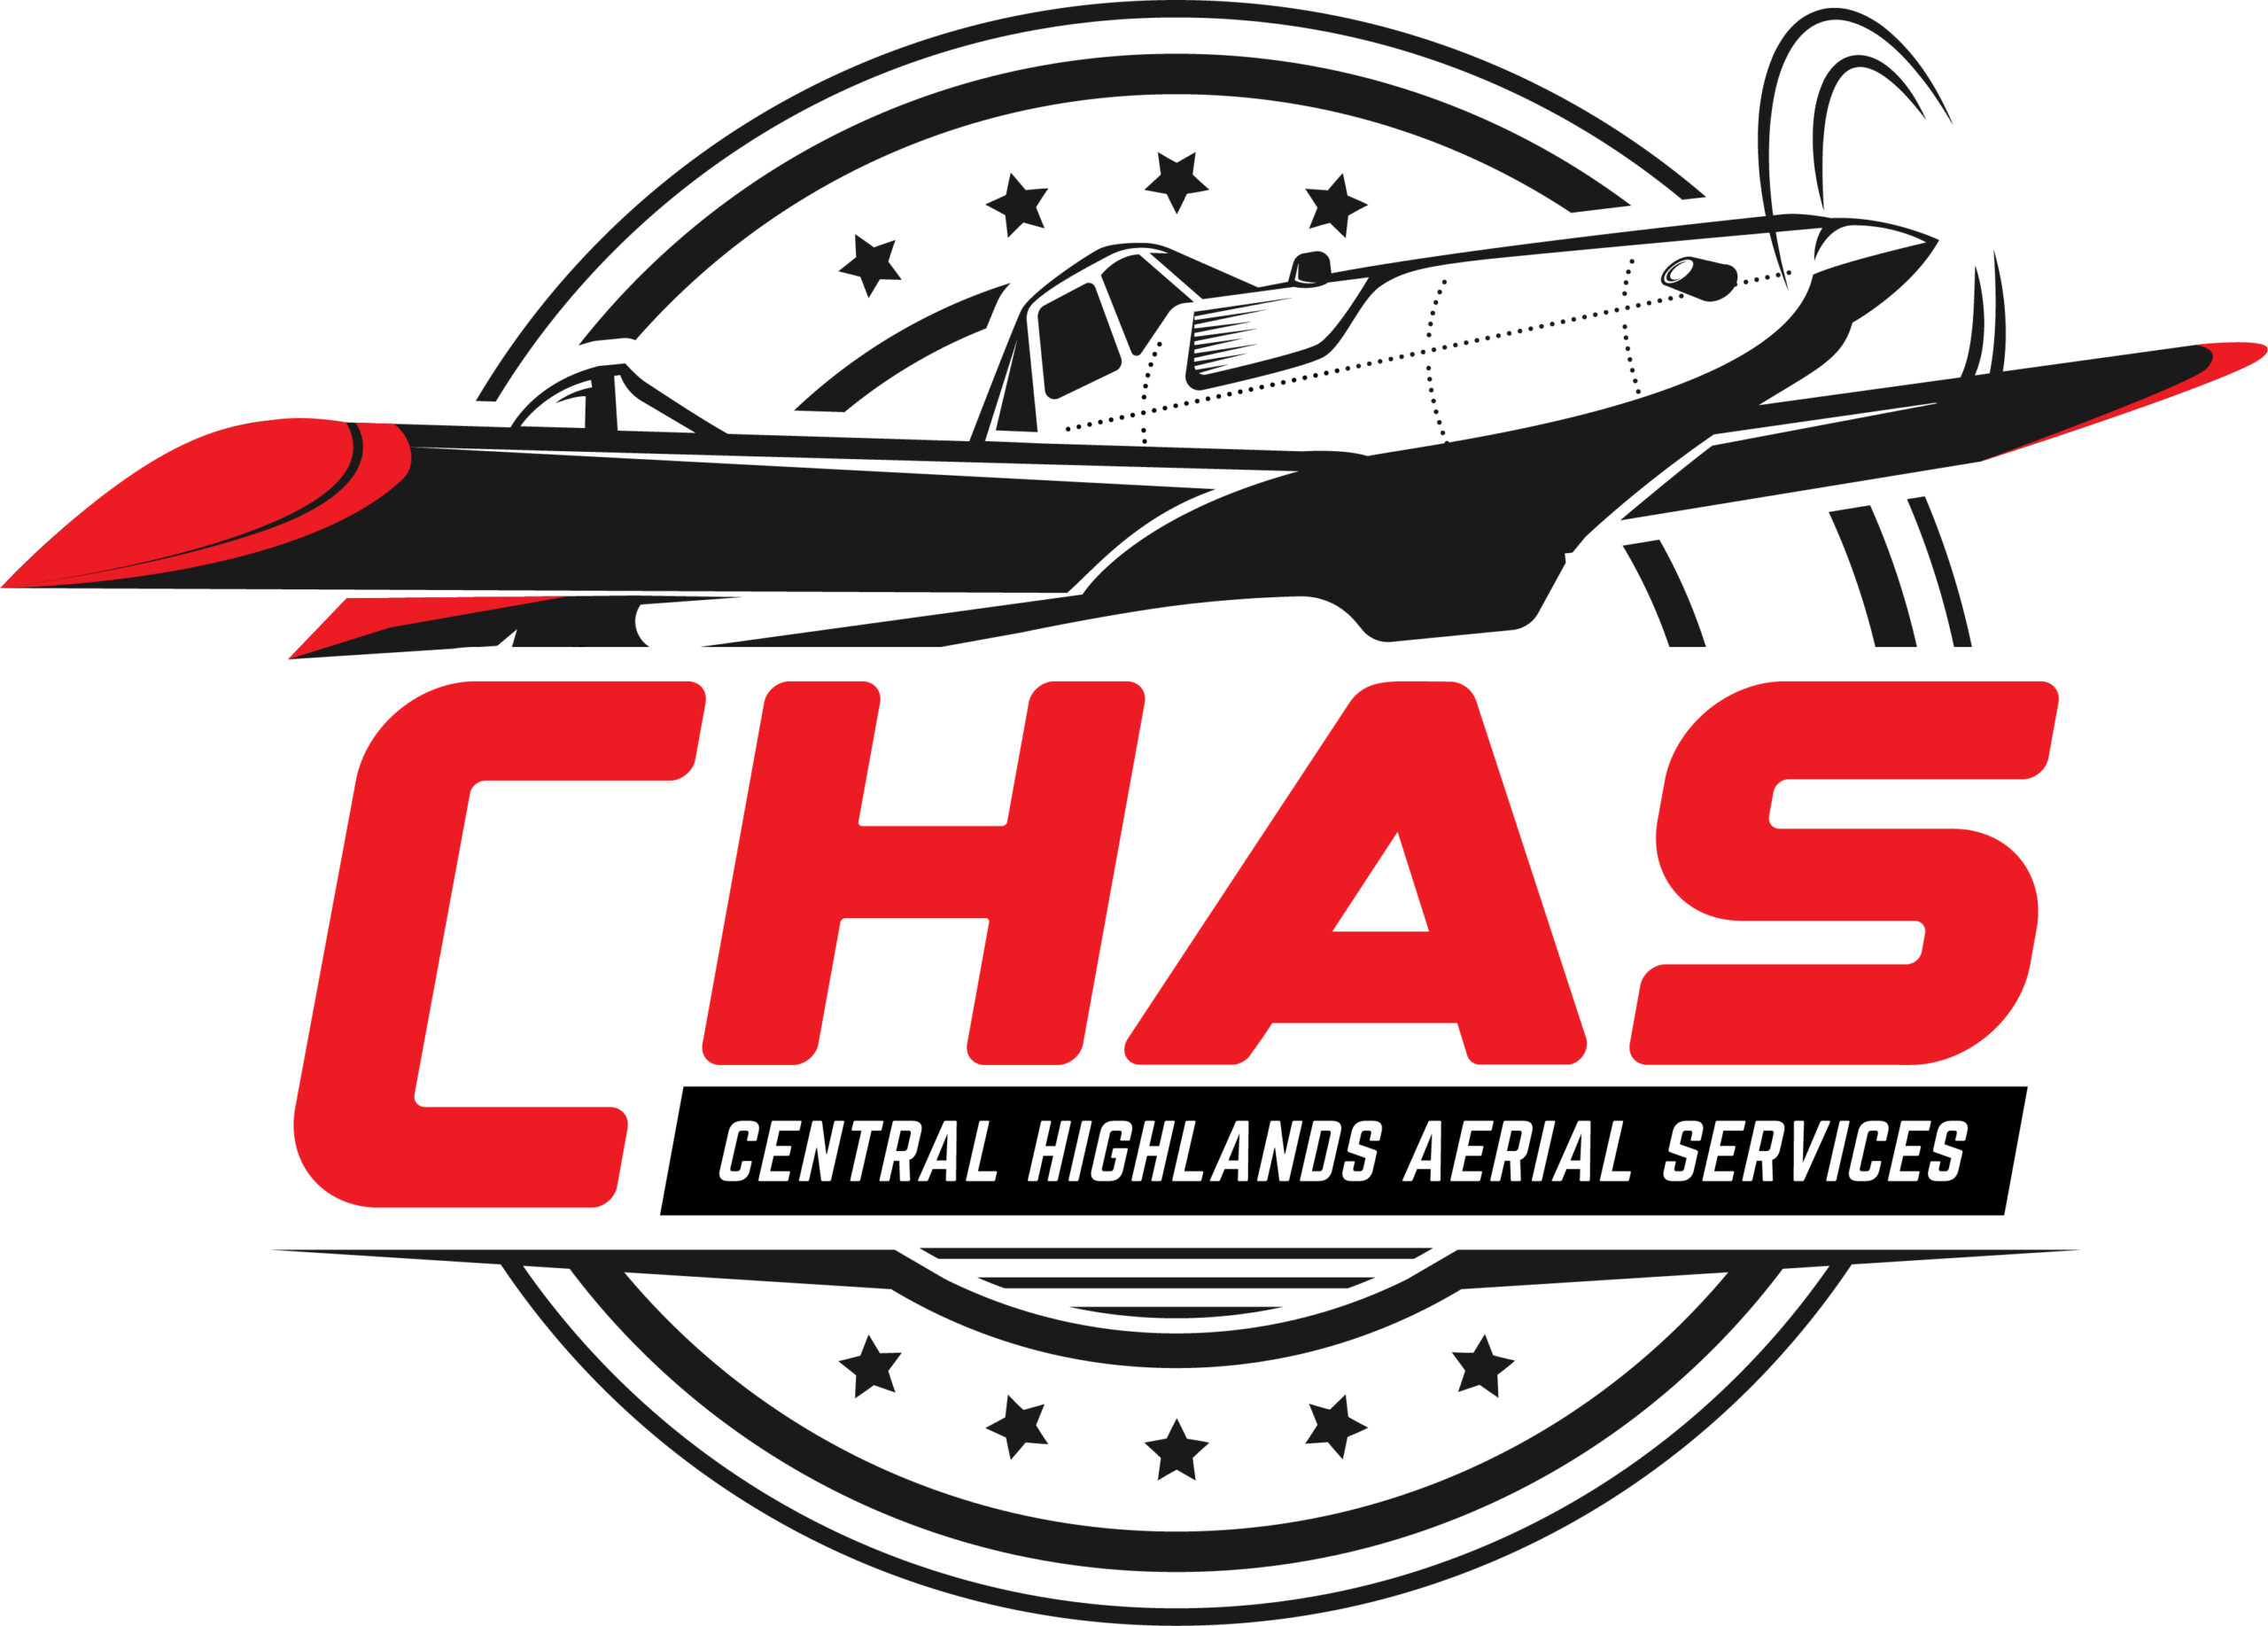 Central Highlands Aerial Services Pty Ltd – Ag Pilot Wanted